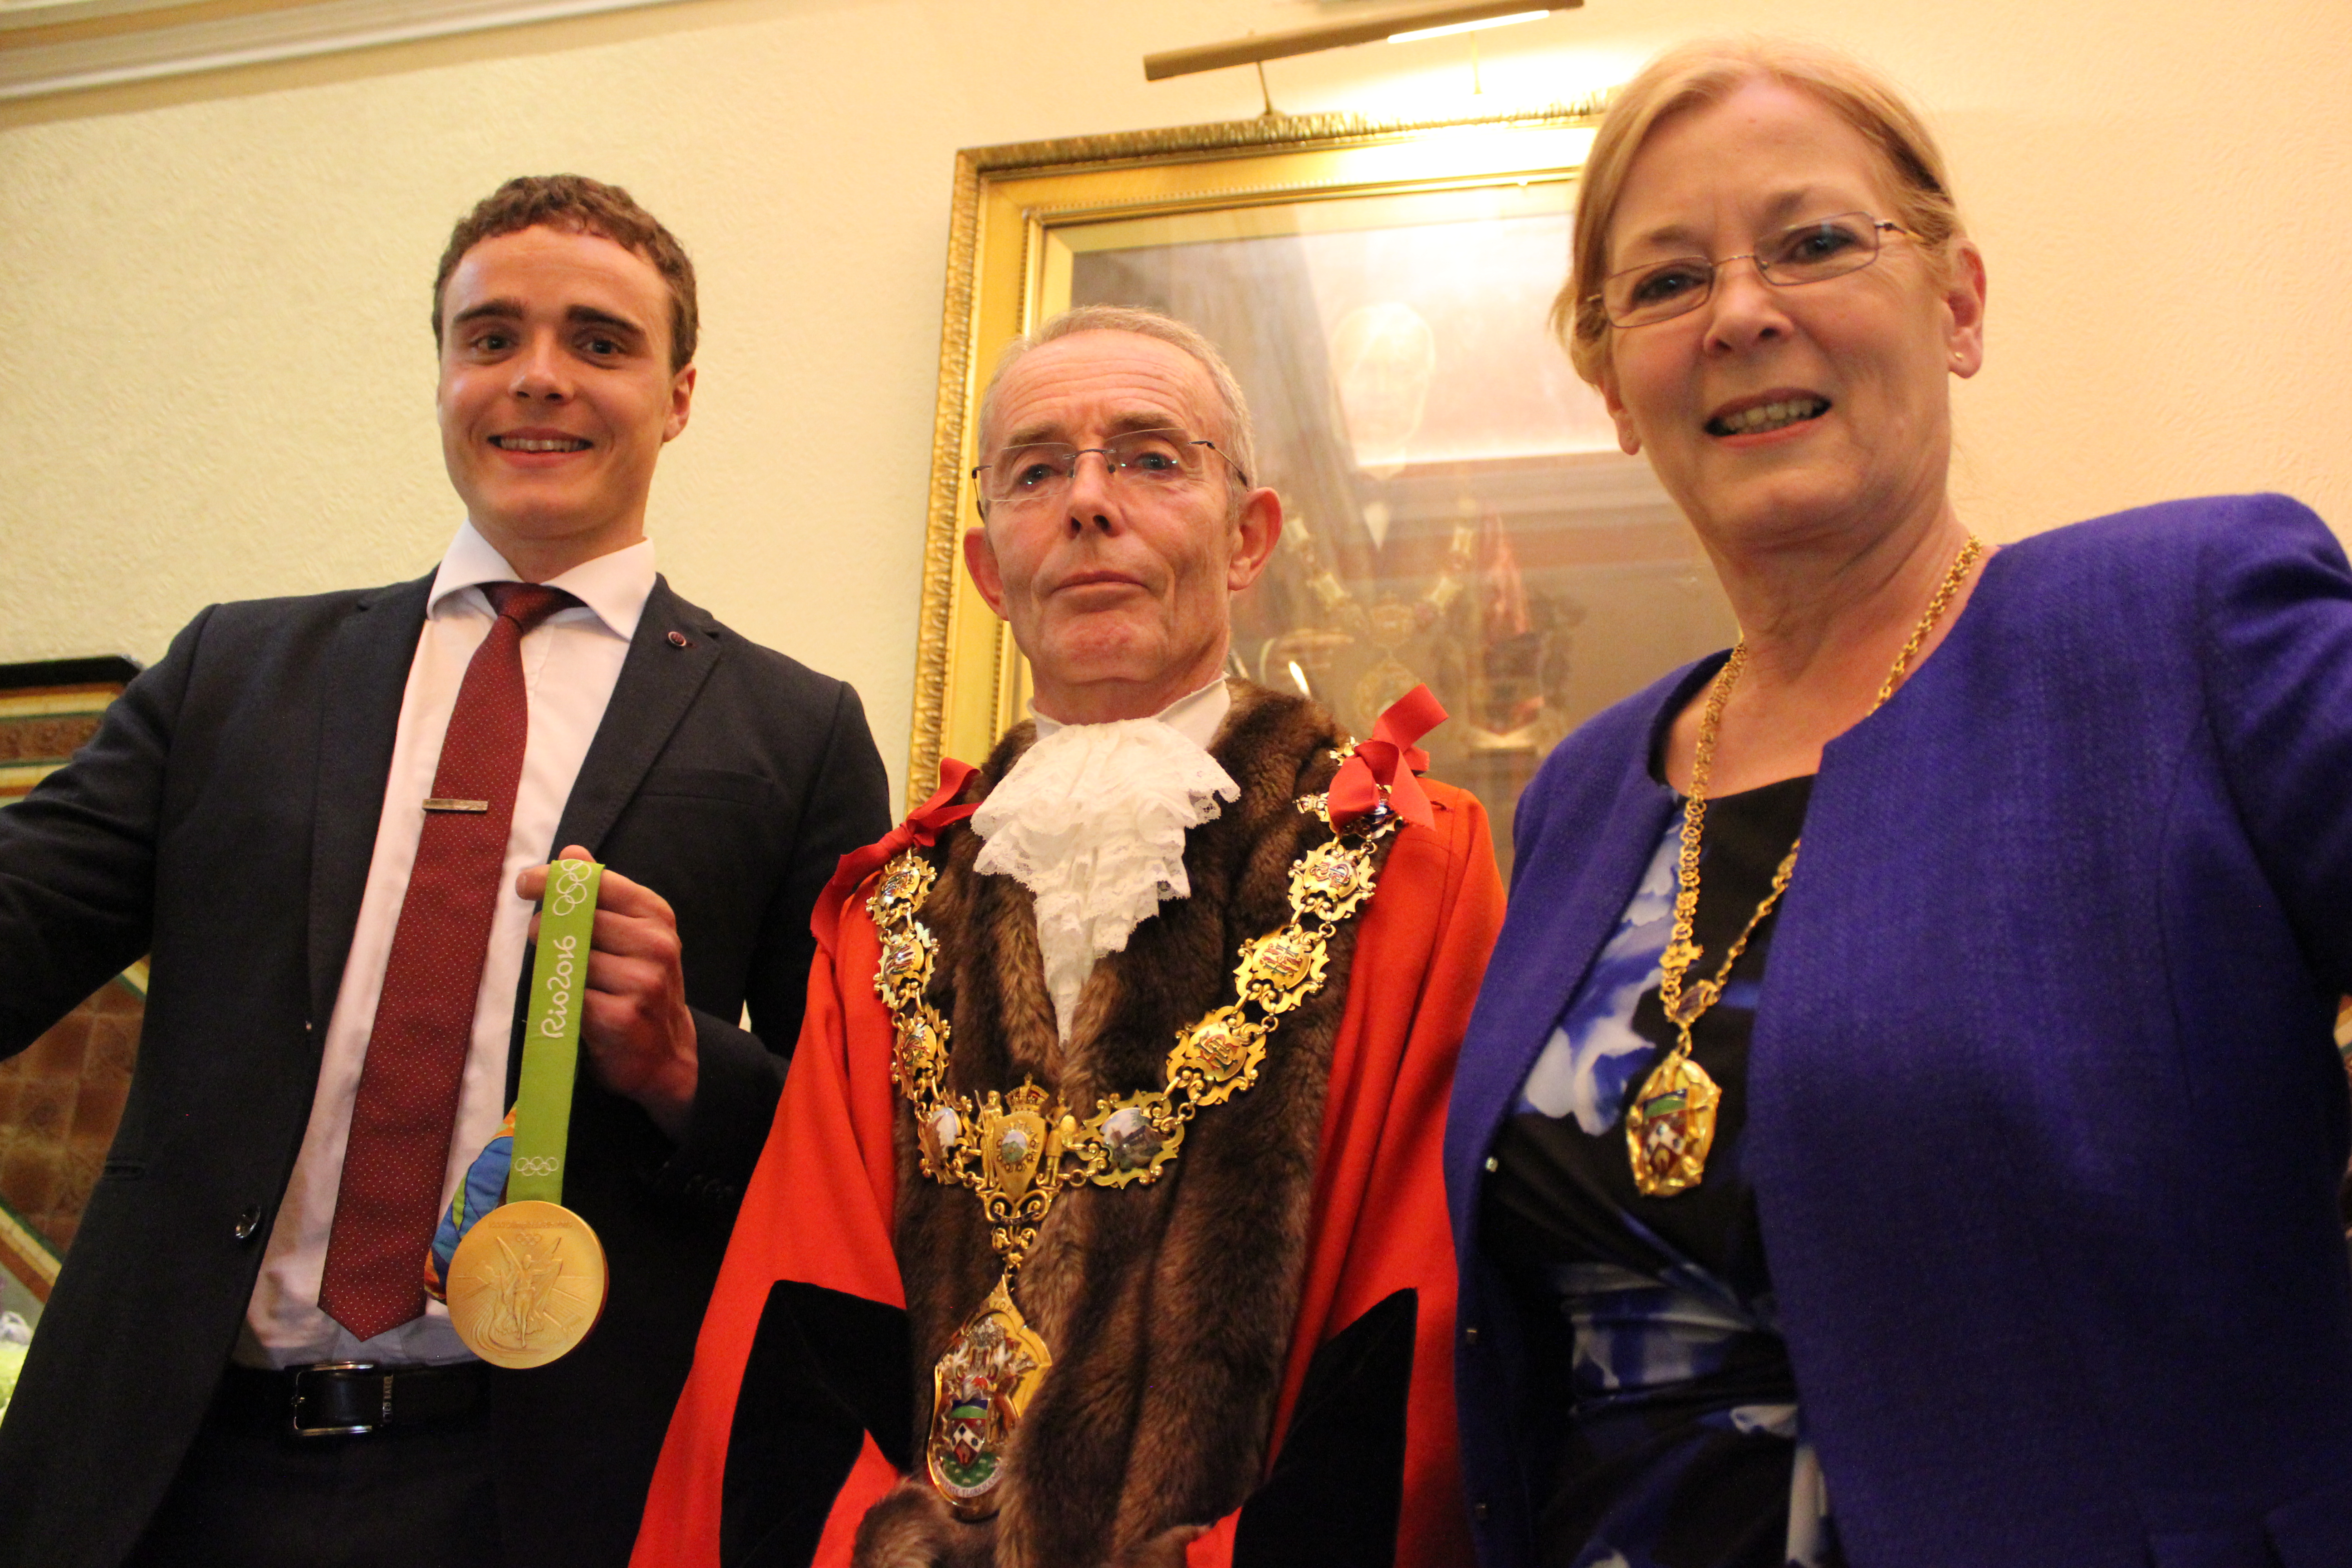 A new Mayor and Mayoress for Pendle